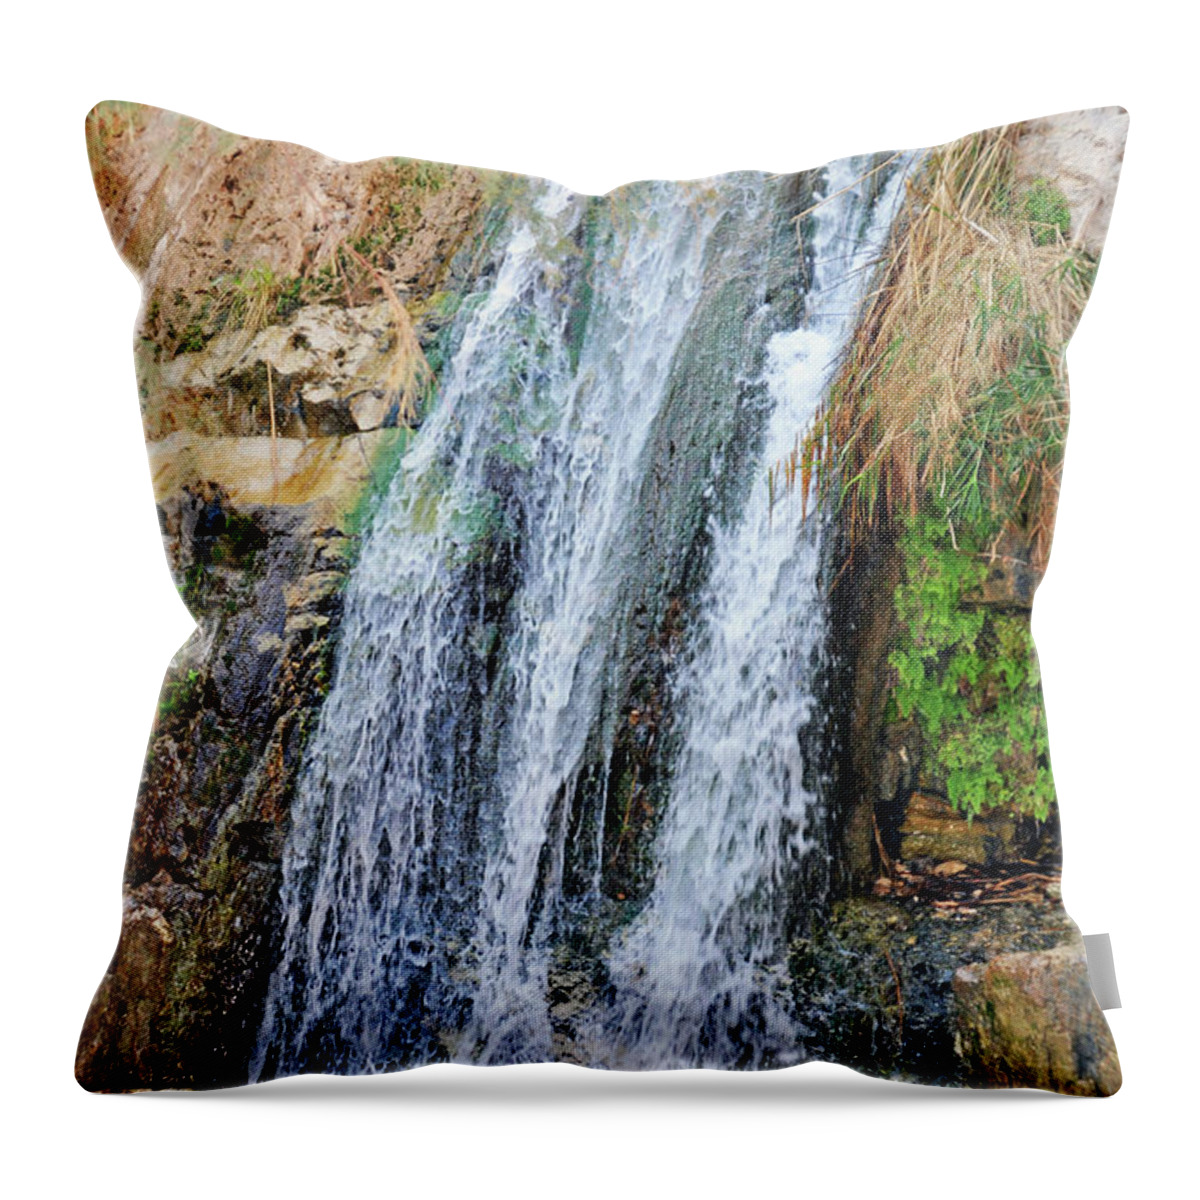 Refreshing Throw Pillow featuring the photograph Refreshing Waters by Lydia Holly